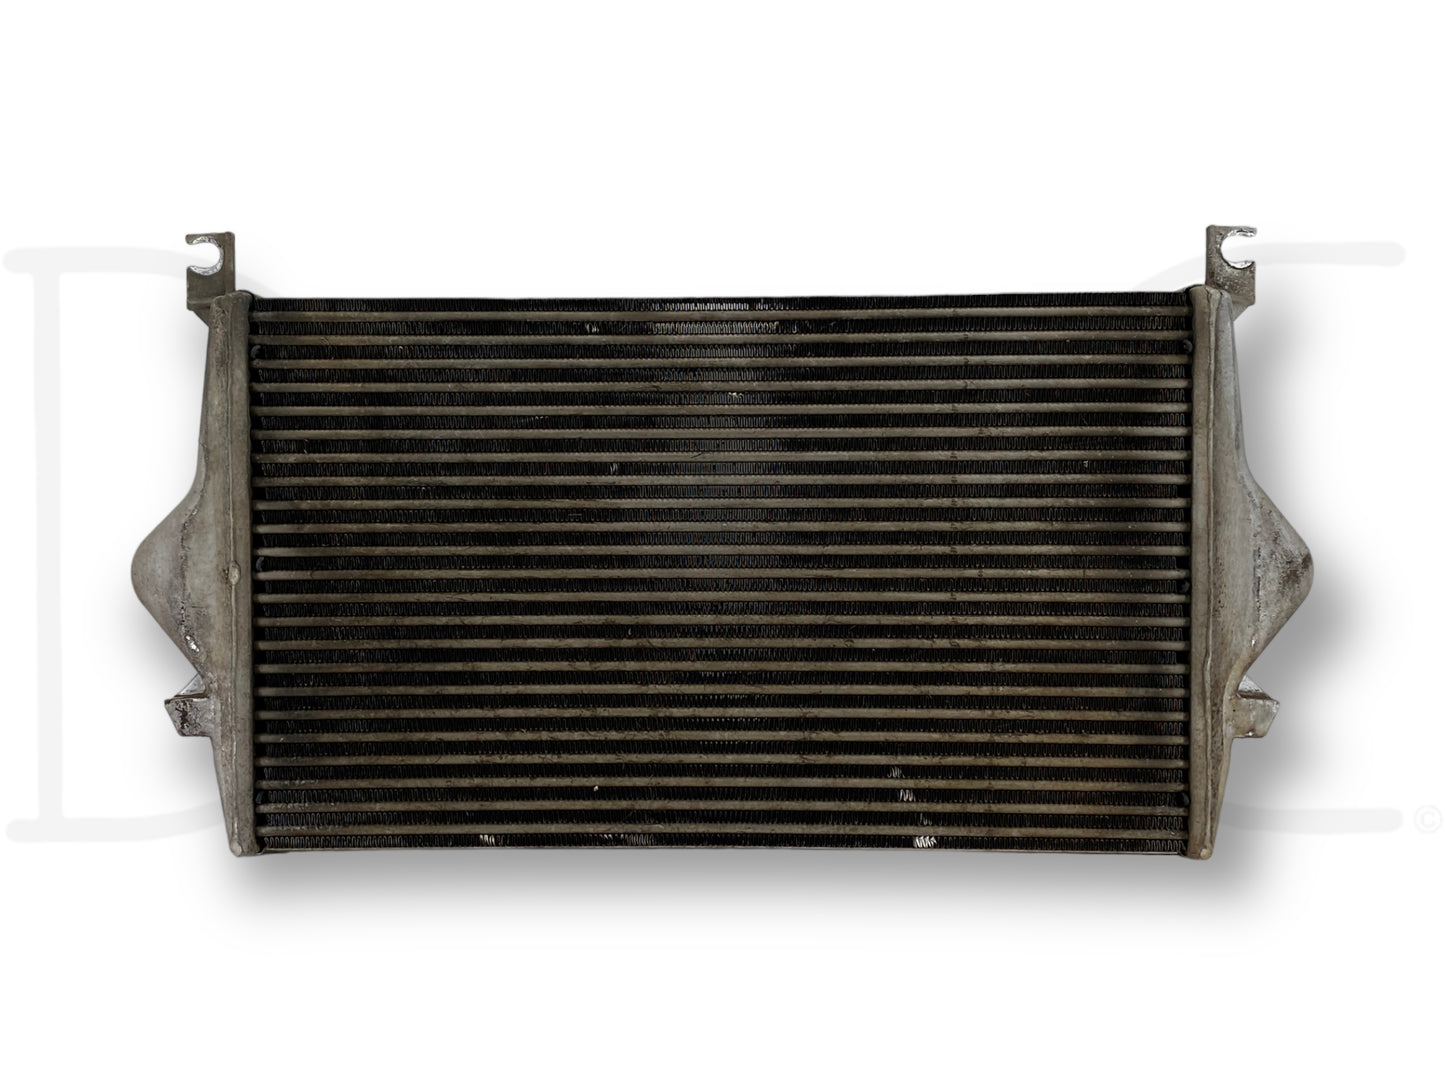 99-01 Ford F250 F350 7.3 7.3L Powerstroke Diesel Intercooler Charge Air Cooler